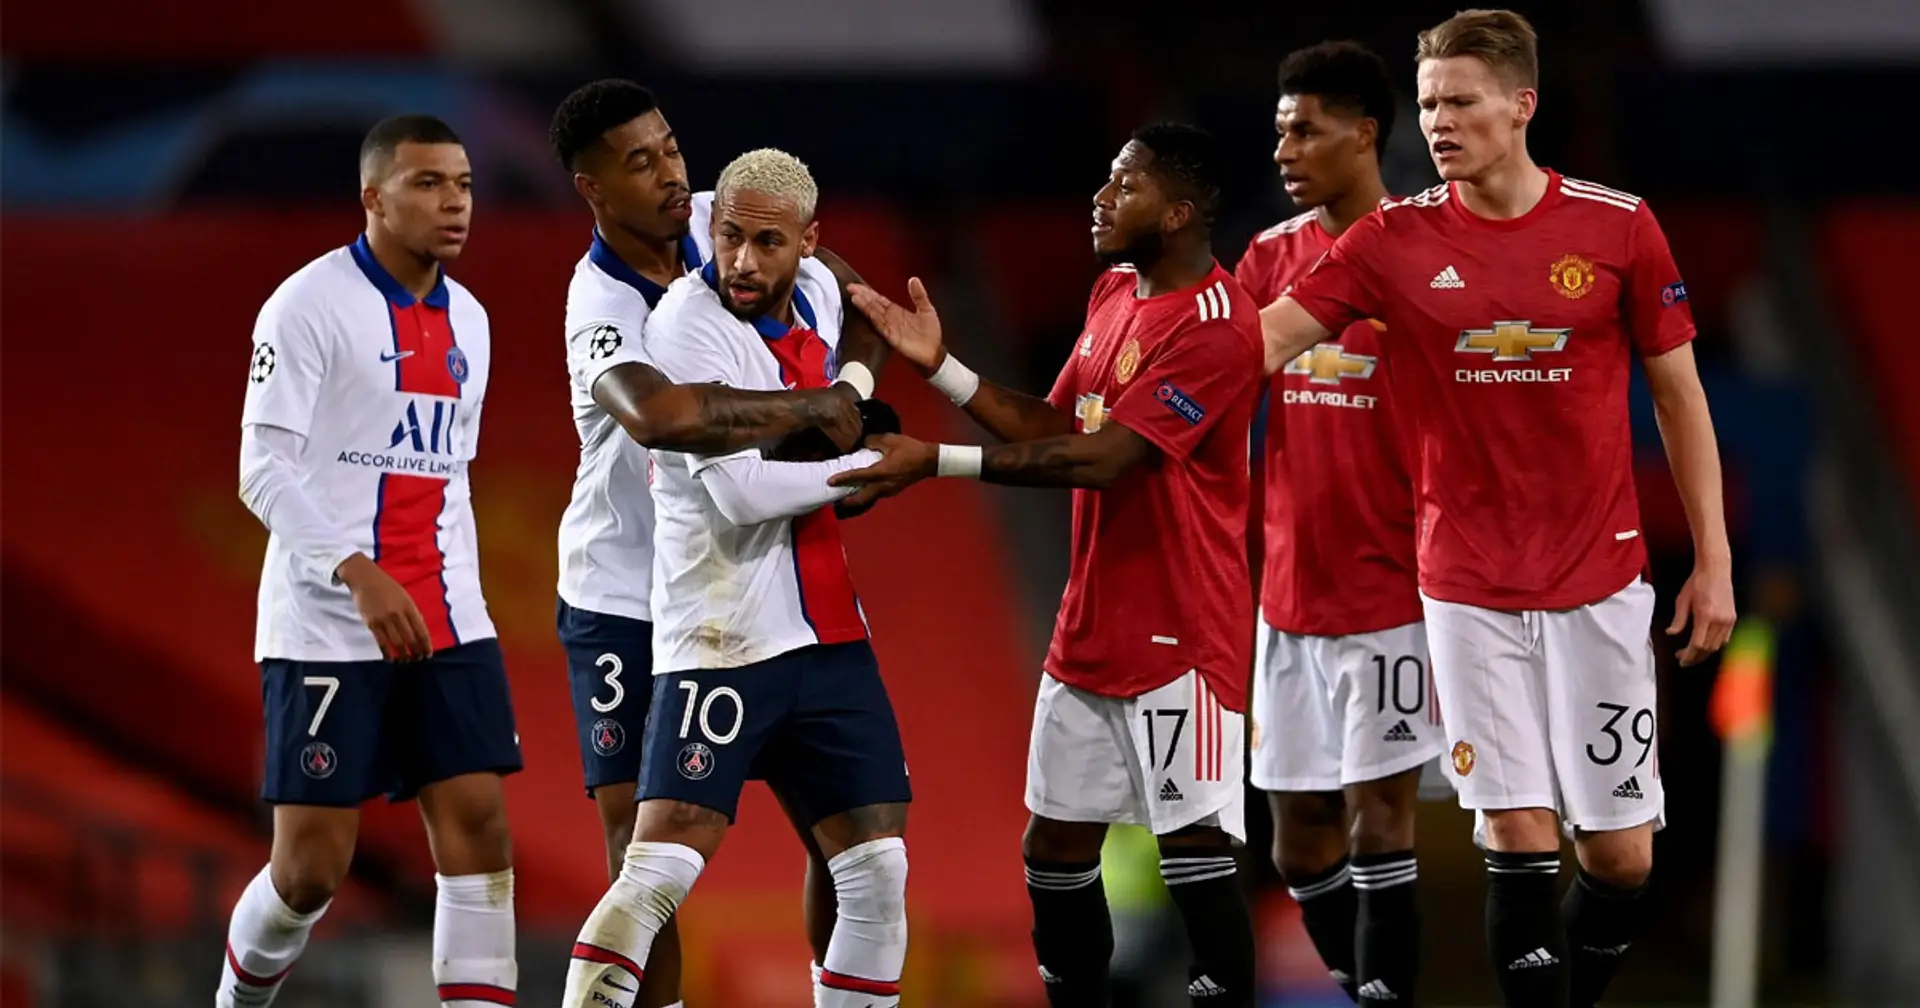 Time substitutions better and more: 4 lessons United can learn from PSG defeat